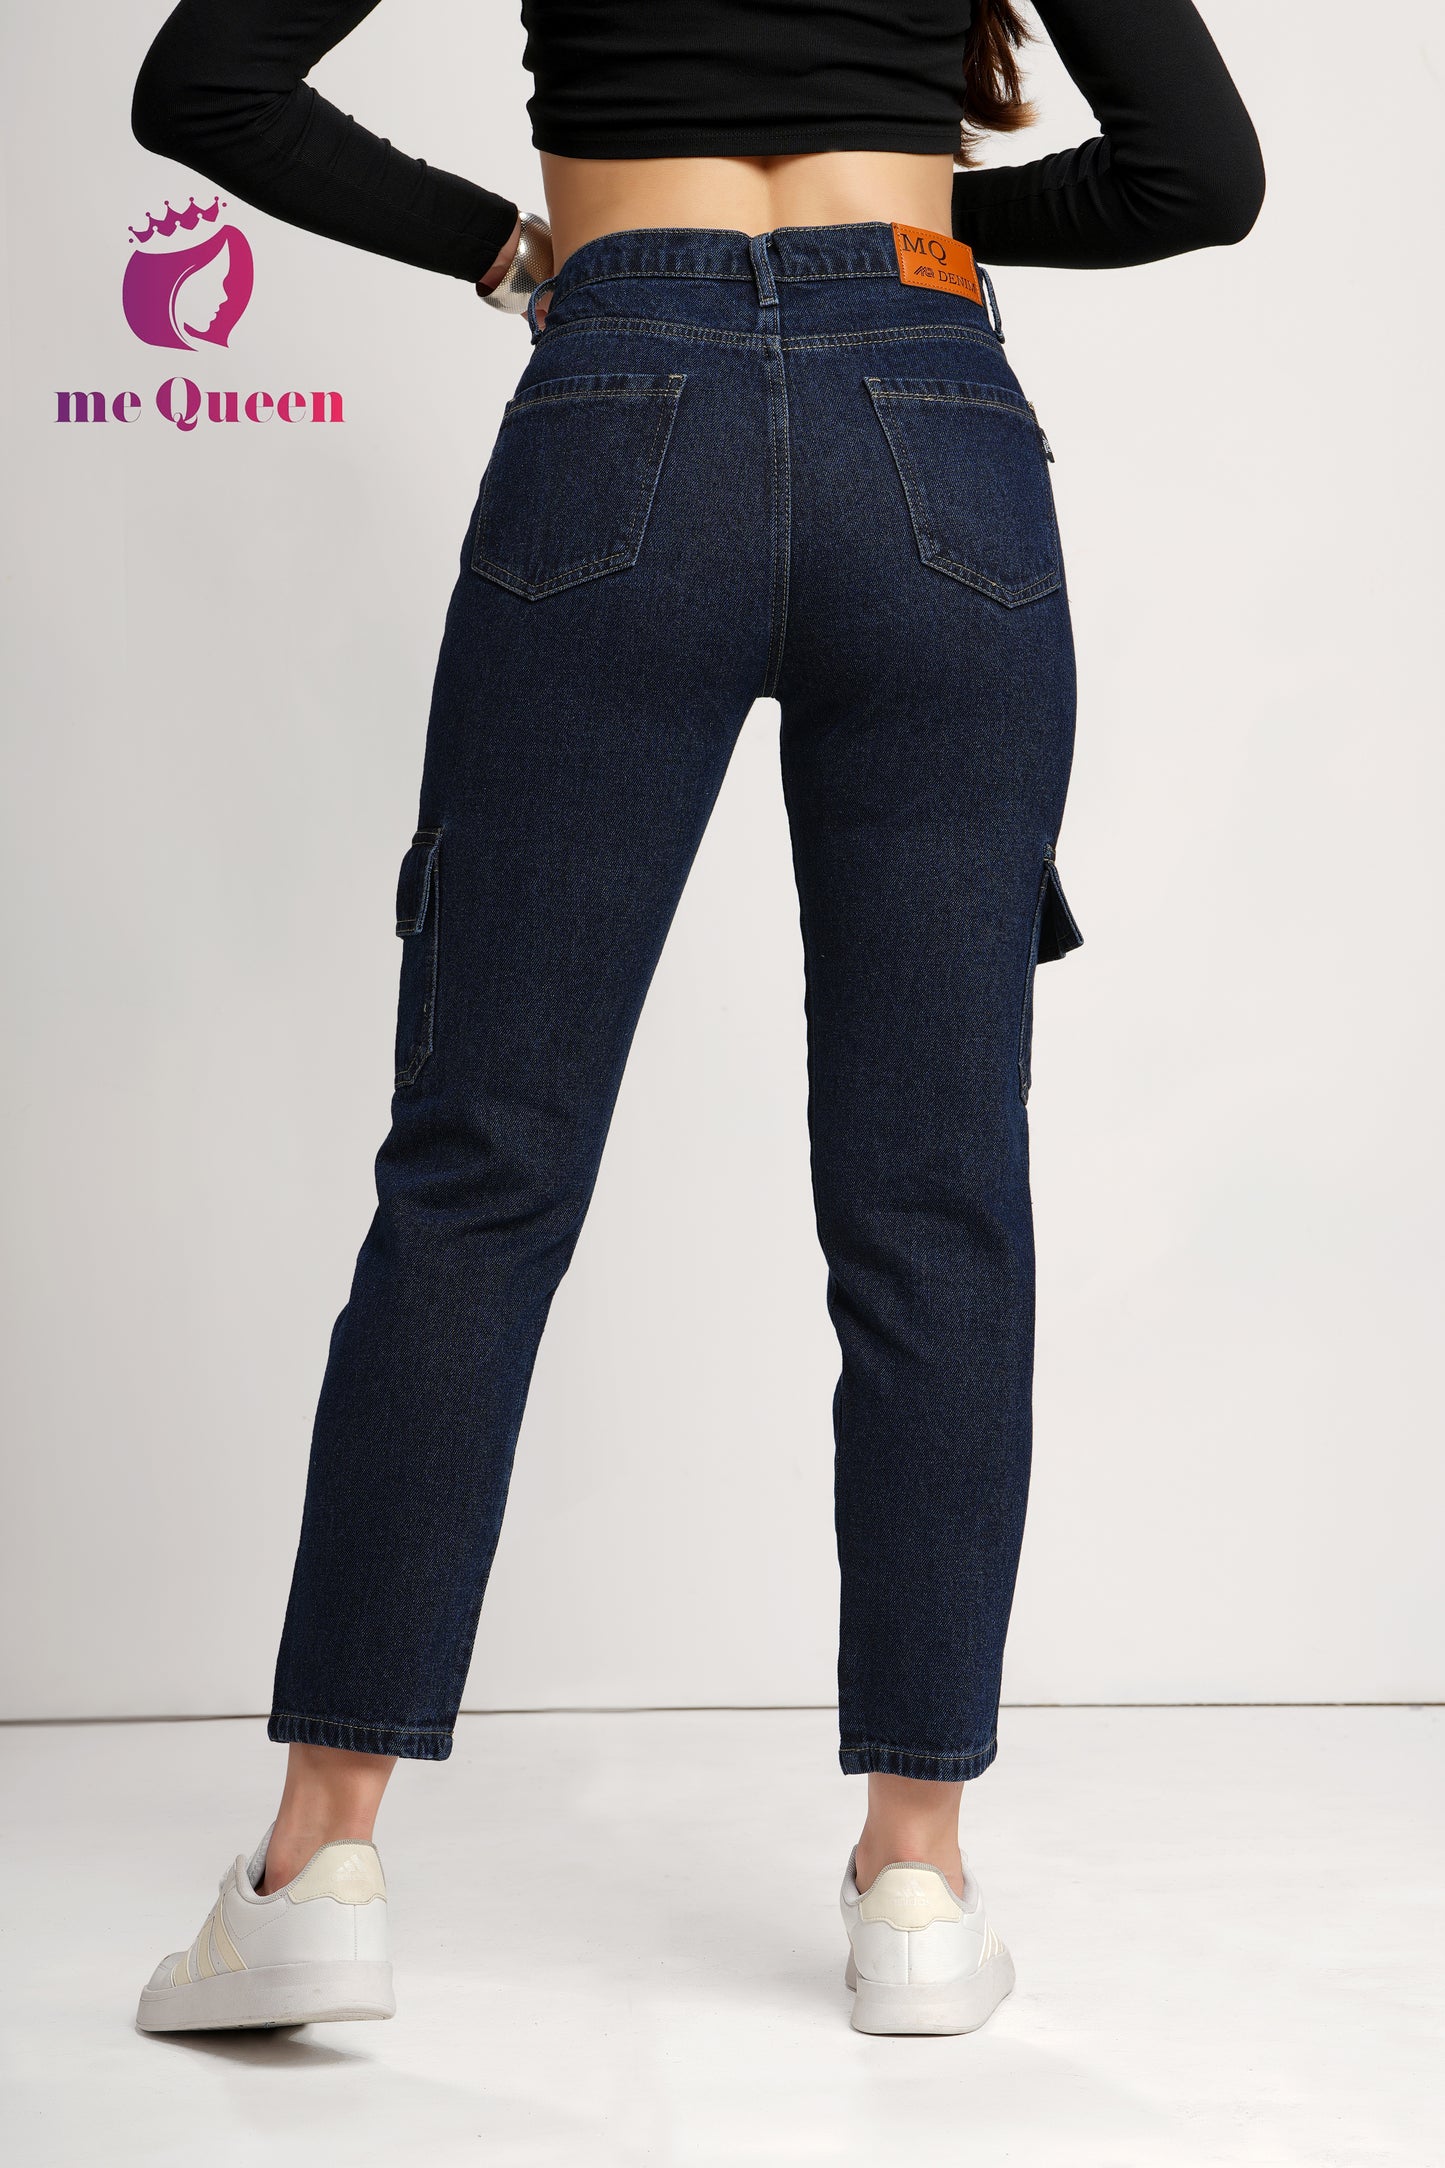 MeQueen Women's Midnight Blue Fit Cargo Jeans with 2 Flap Pockets